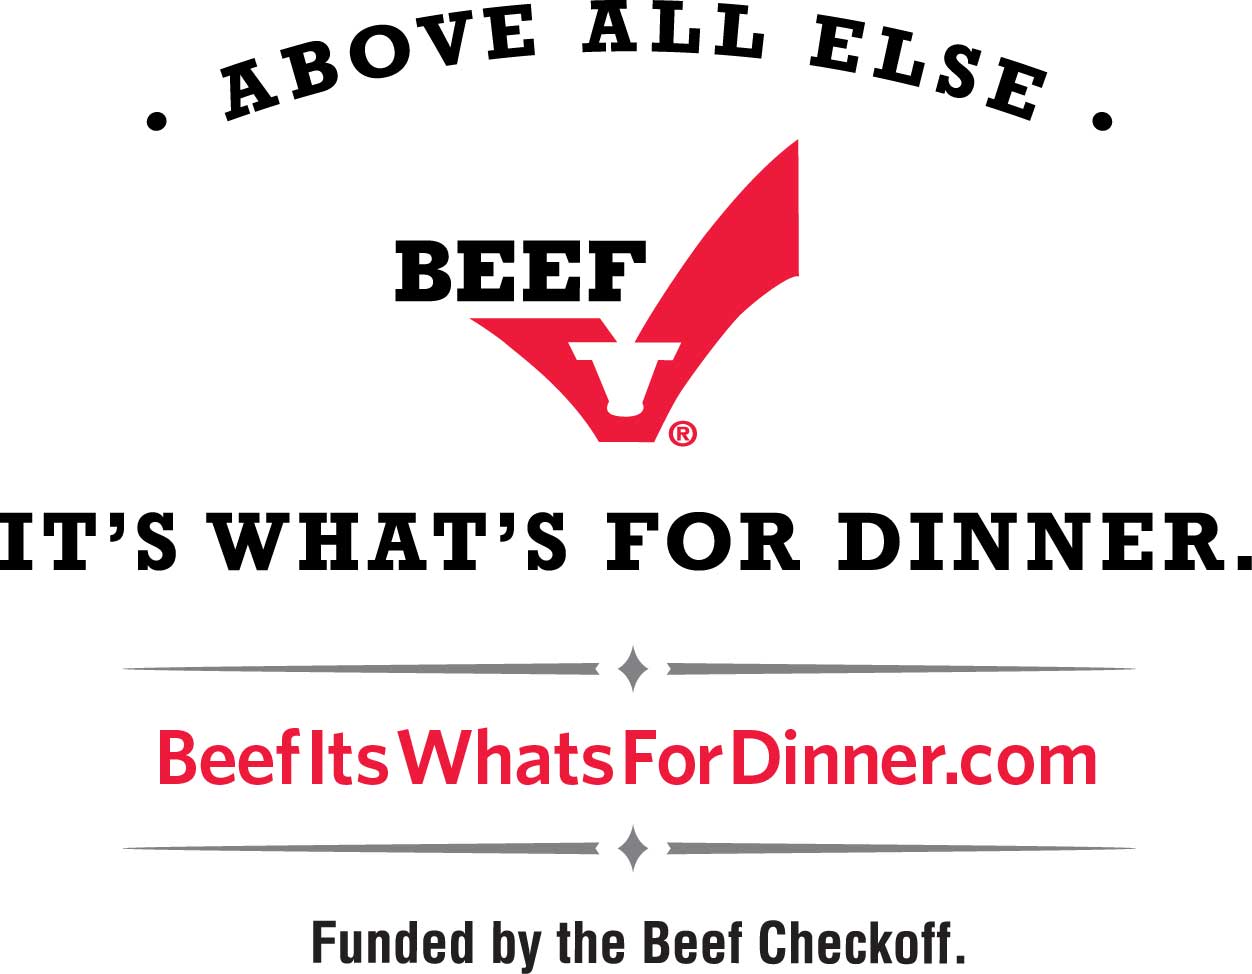 http://www.cindysrecipesandwritings.com/wp-content/uploads/2014/08/The-Beef-Checkoff-Logo-for-Posts.jpg